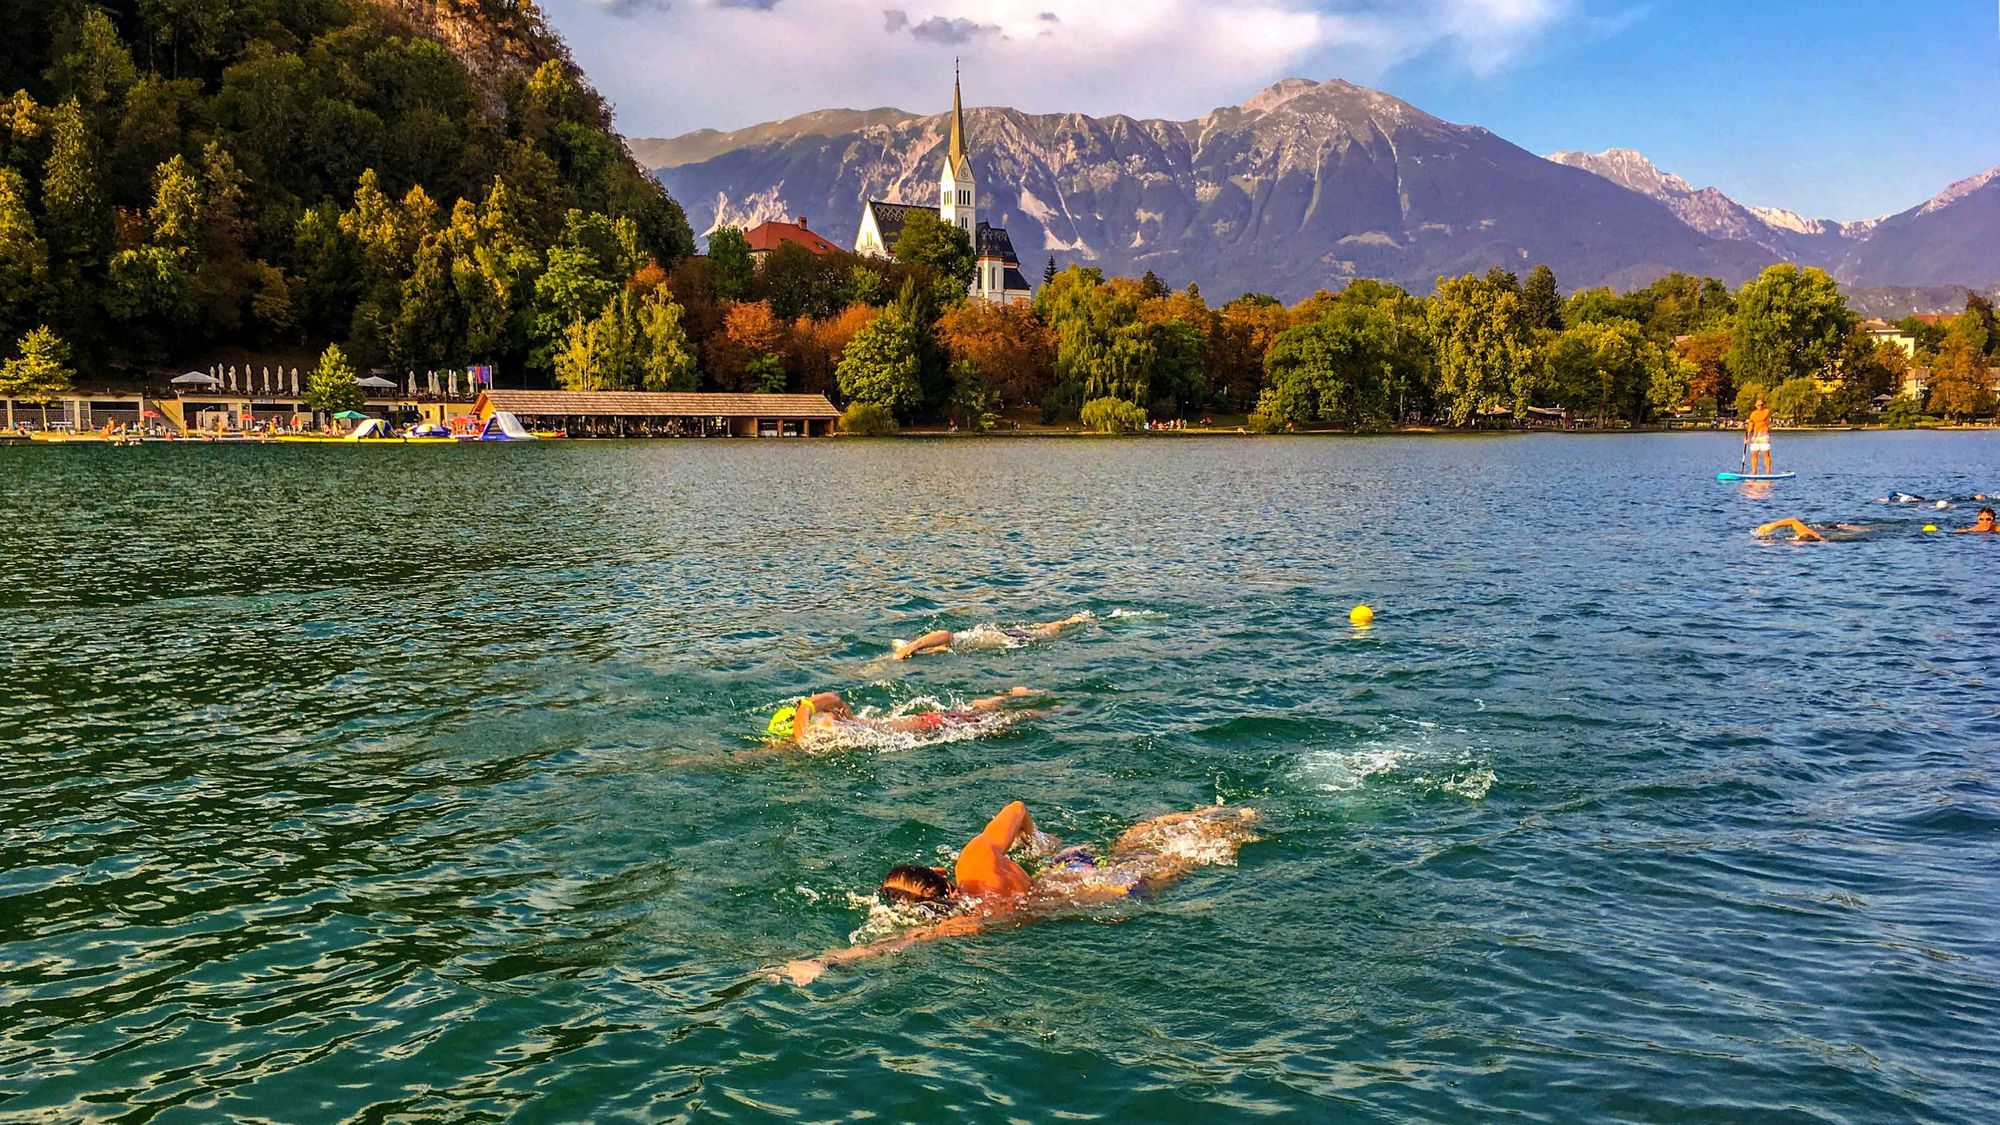 Swimmers in Lake Bled.